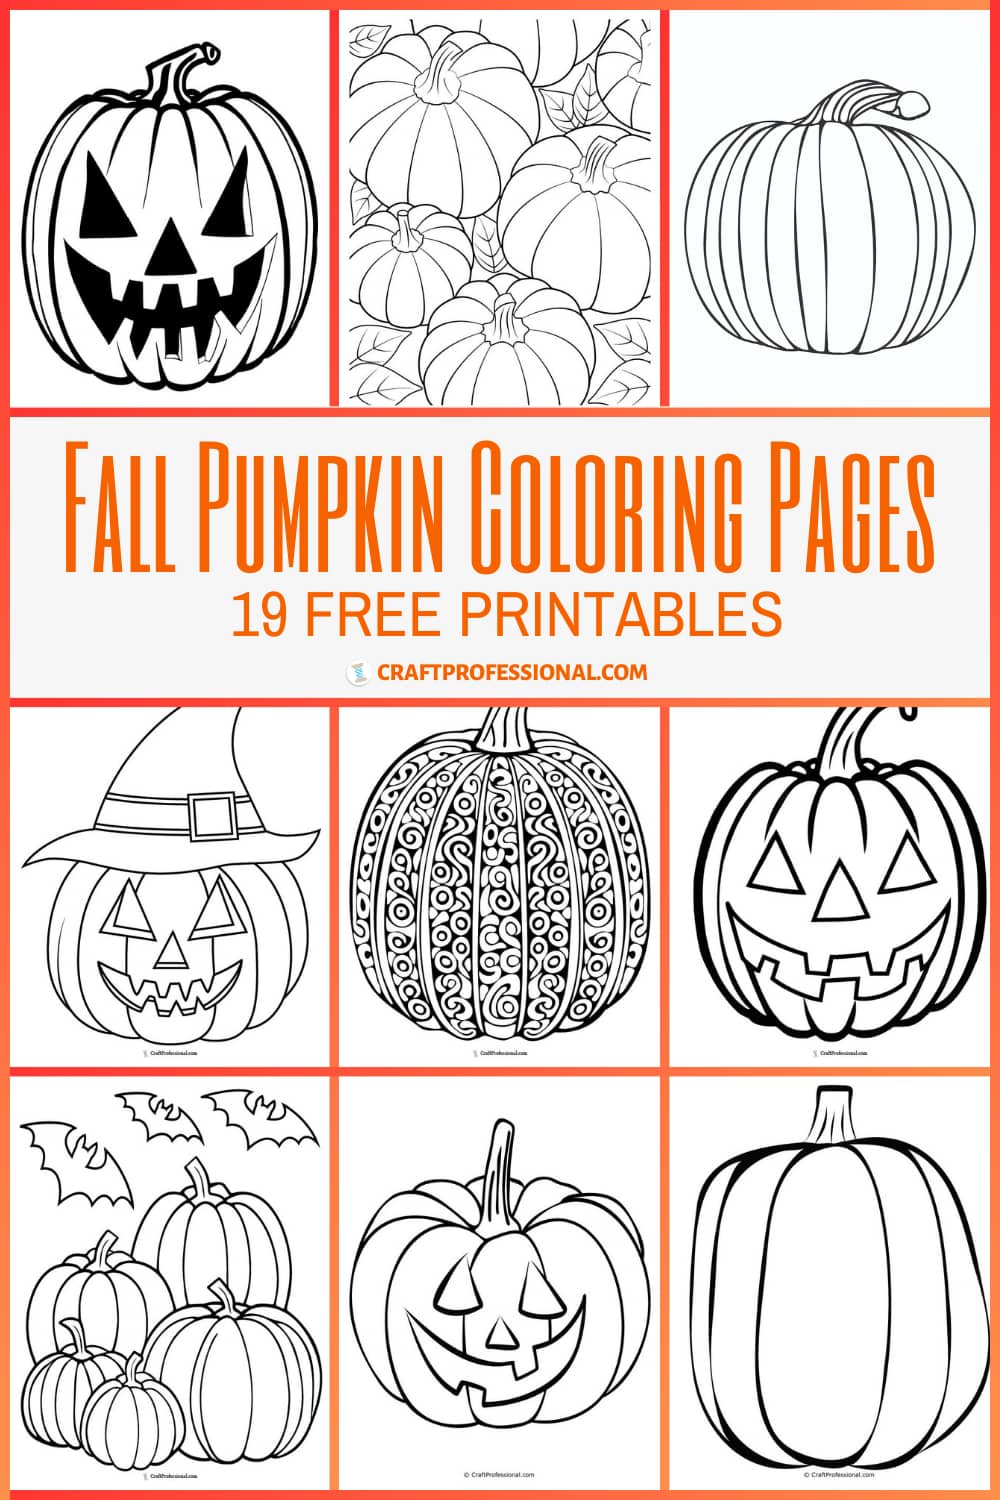 FREE Fall Mini Books and 12 Coloring Pages